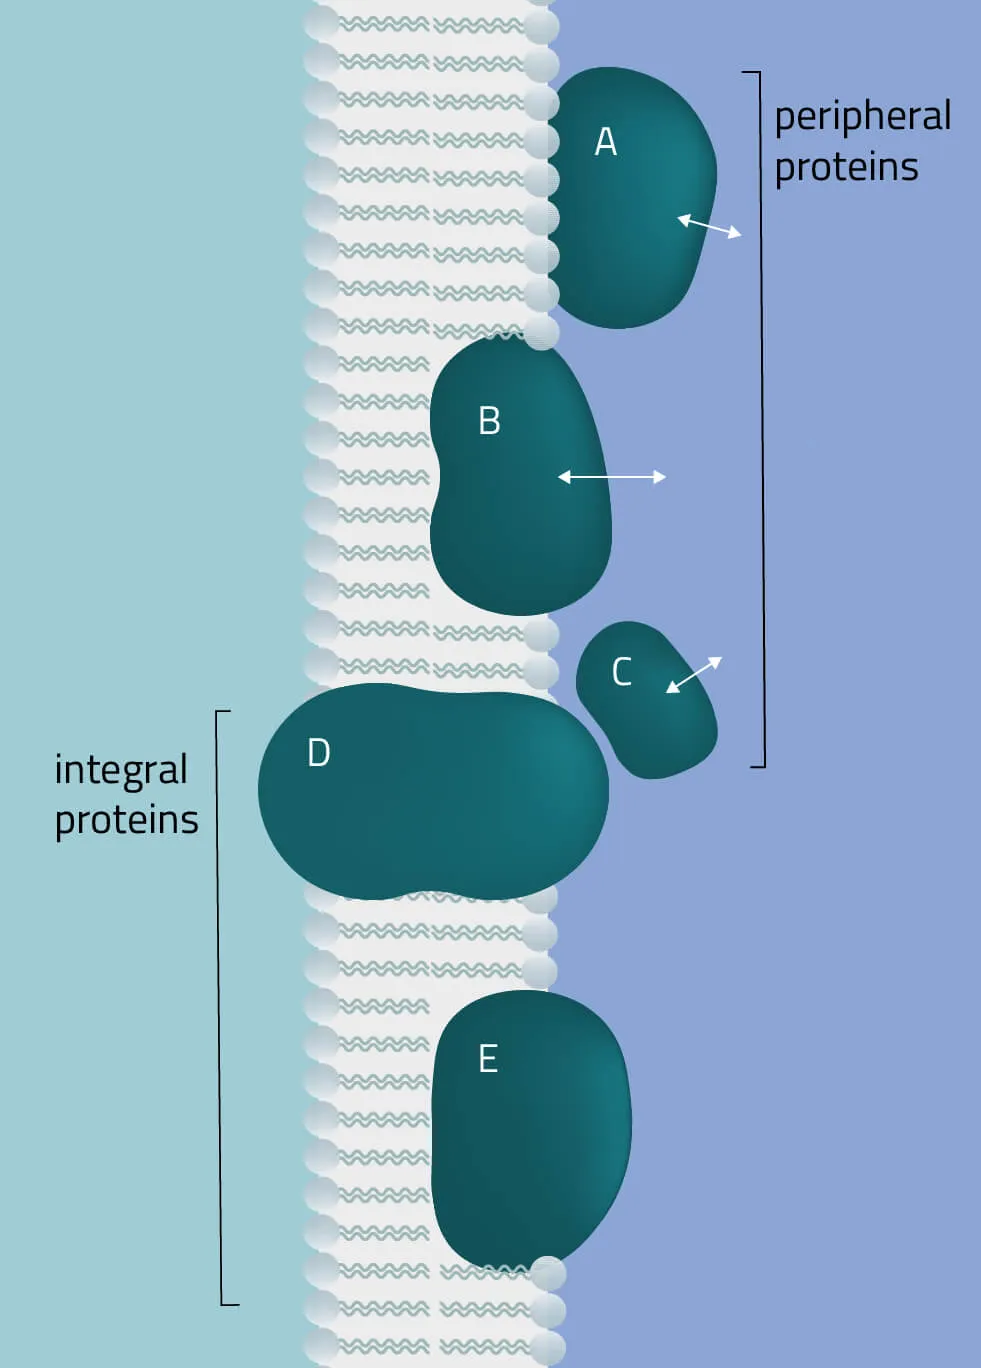 Peripheral and integral proteins - the Differences